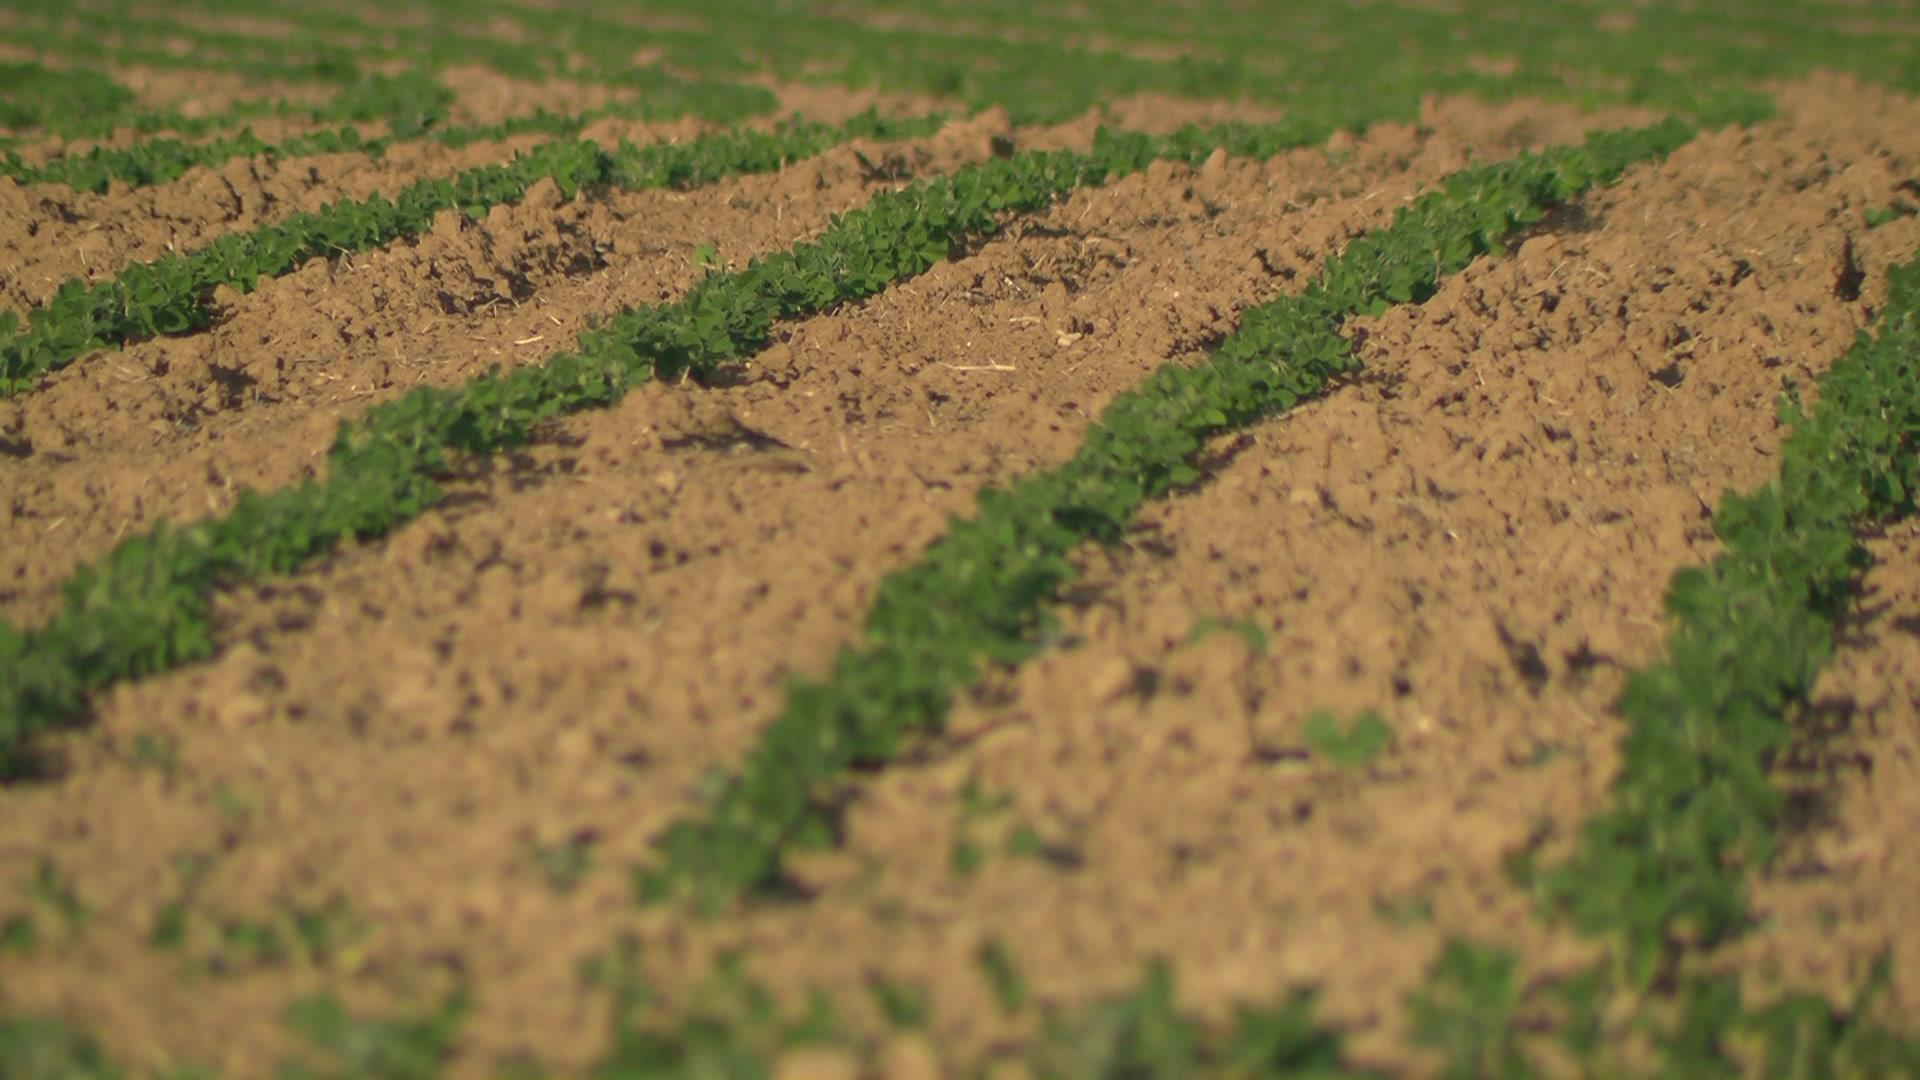 Dry spell causing concerns for SE Wisconsin farmers